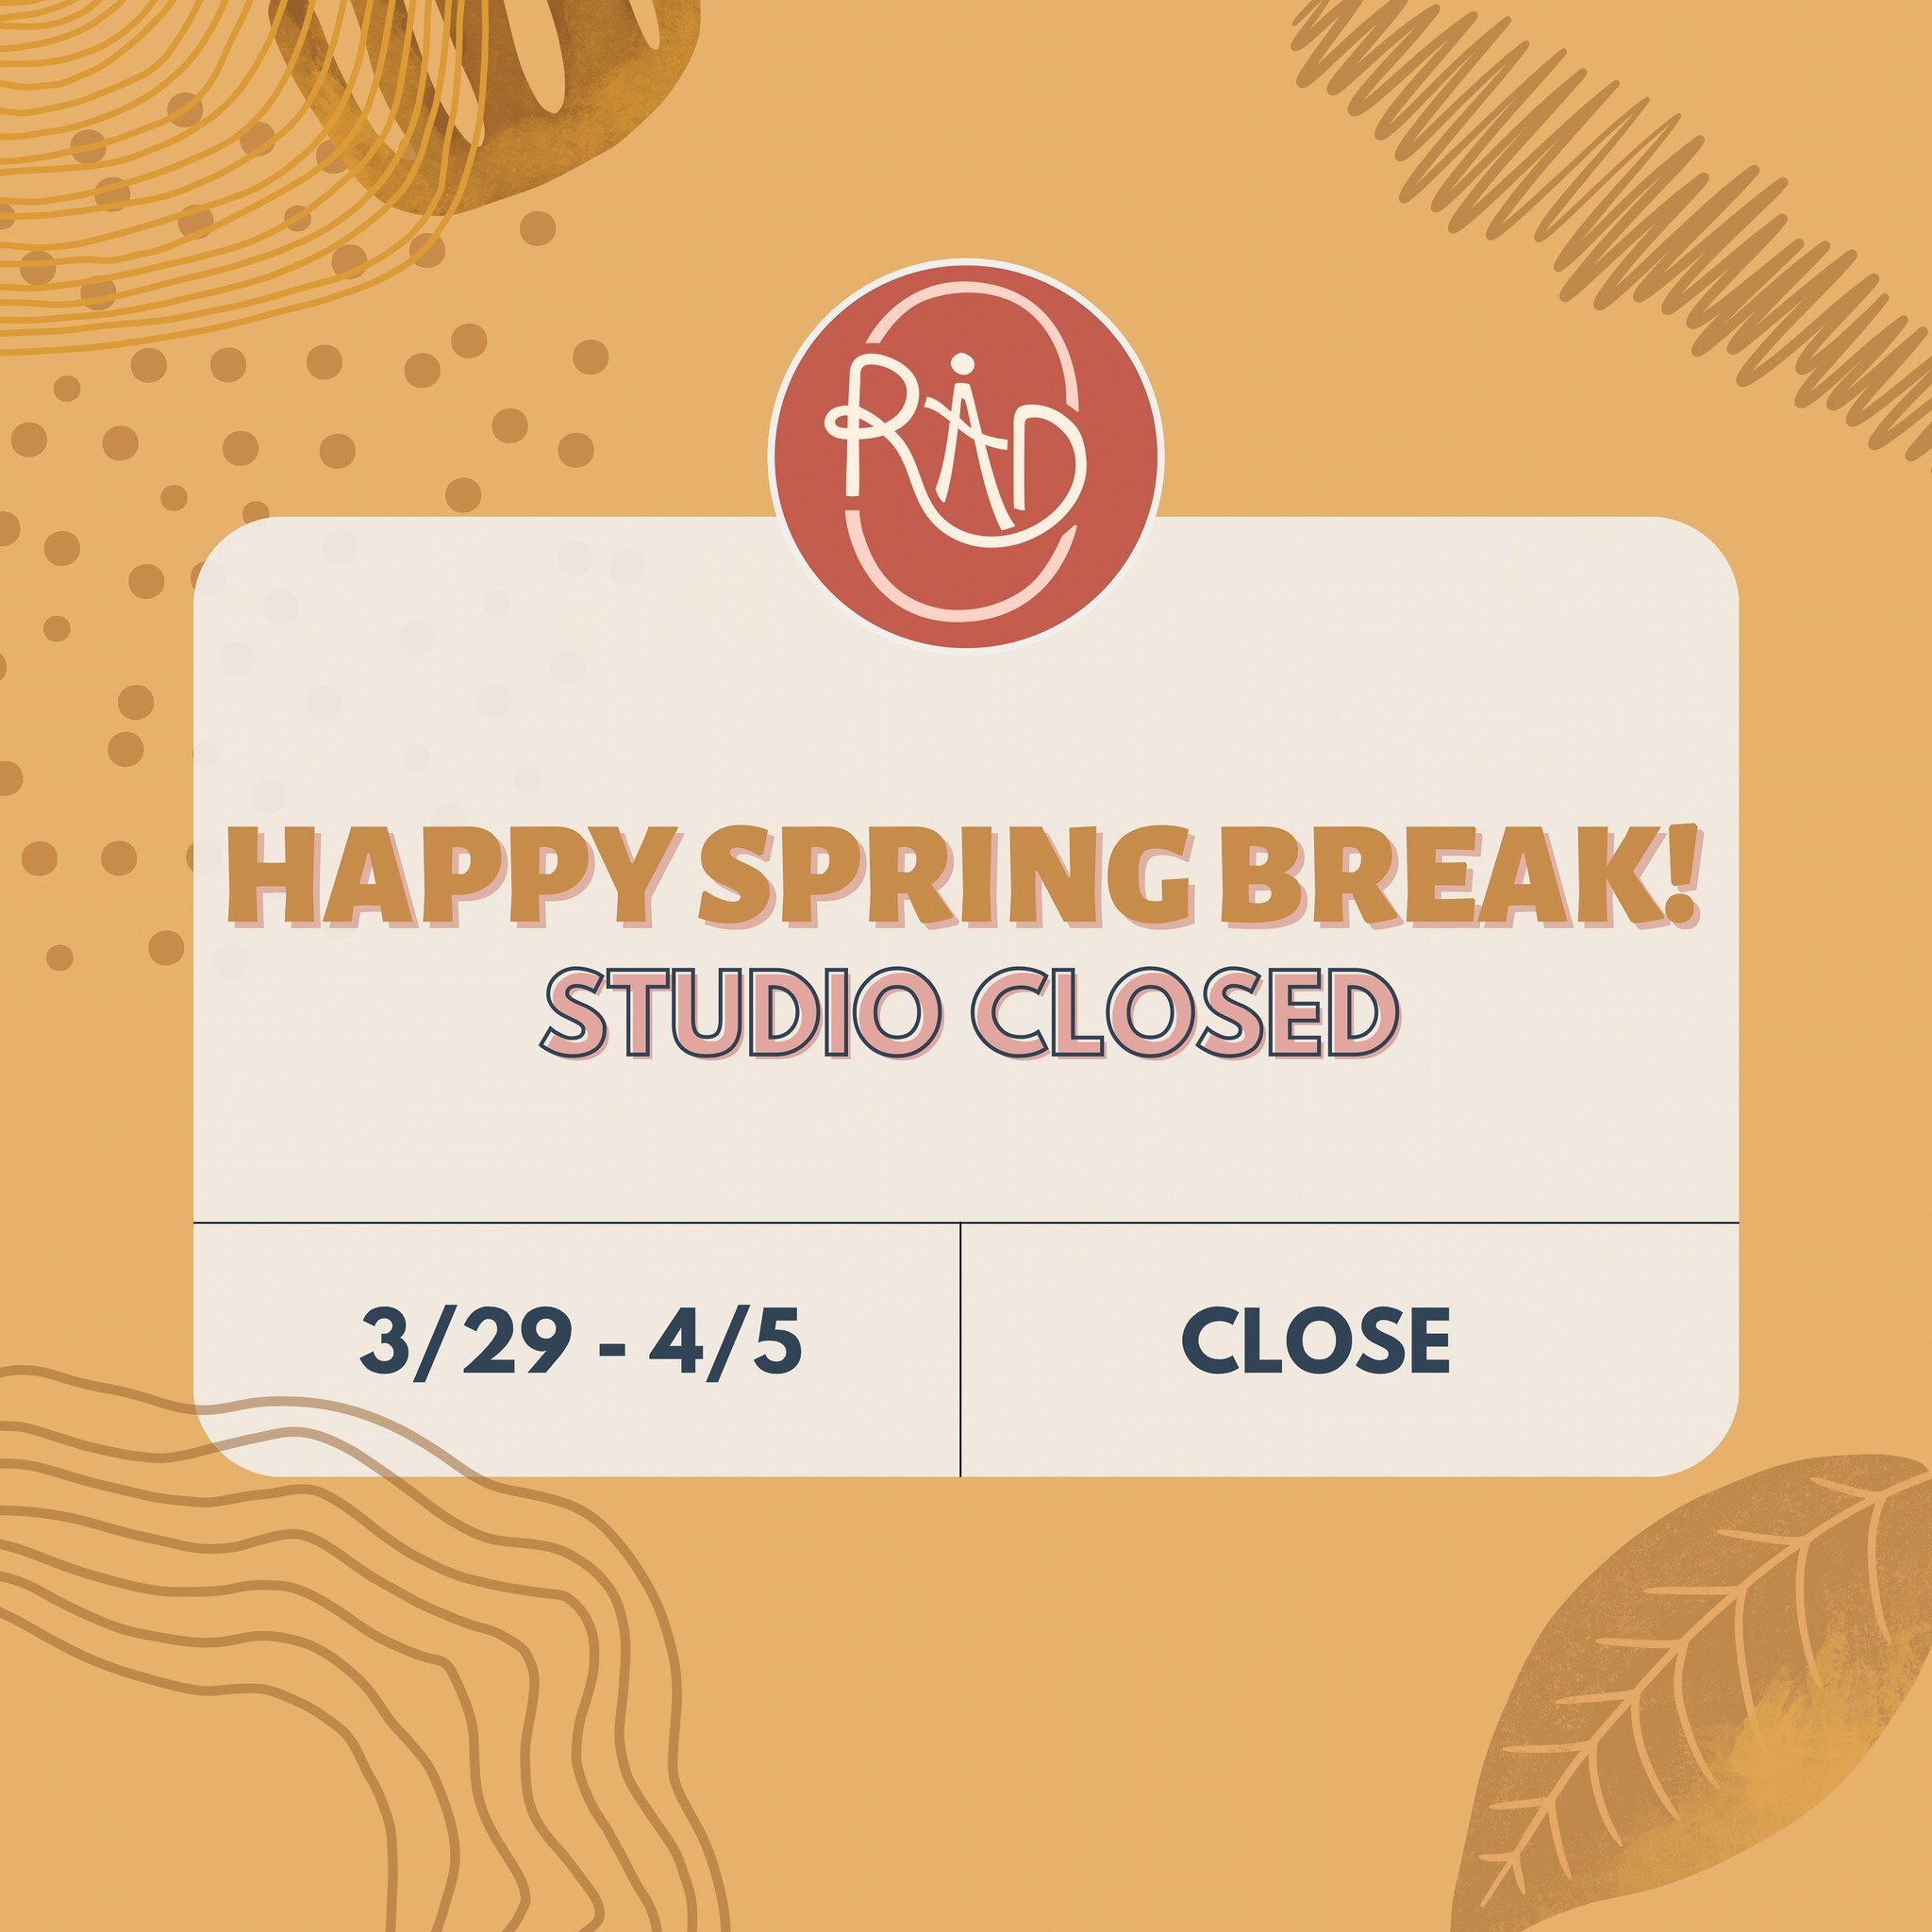 🎉 Have a RAD Spring Break!

🙏🏼 Wishing all of our Dance Families &amp; Dancers a Safe, Restful and Rejuvenating Spring Break! Happy Easter! Happy Passover! Happy Spring Break :)

🌟 Studio closed Friday, March 29th - Friday, April 5th. Classes res